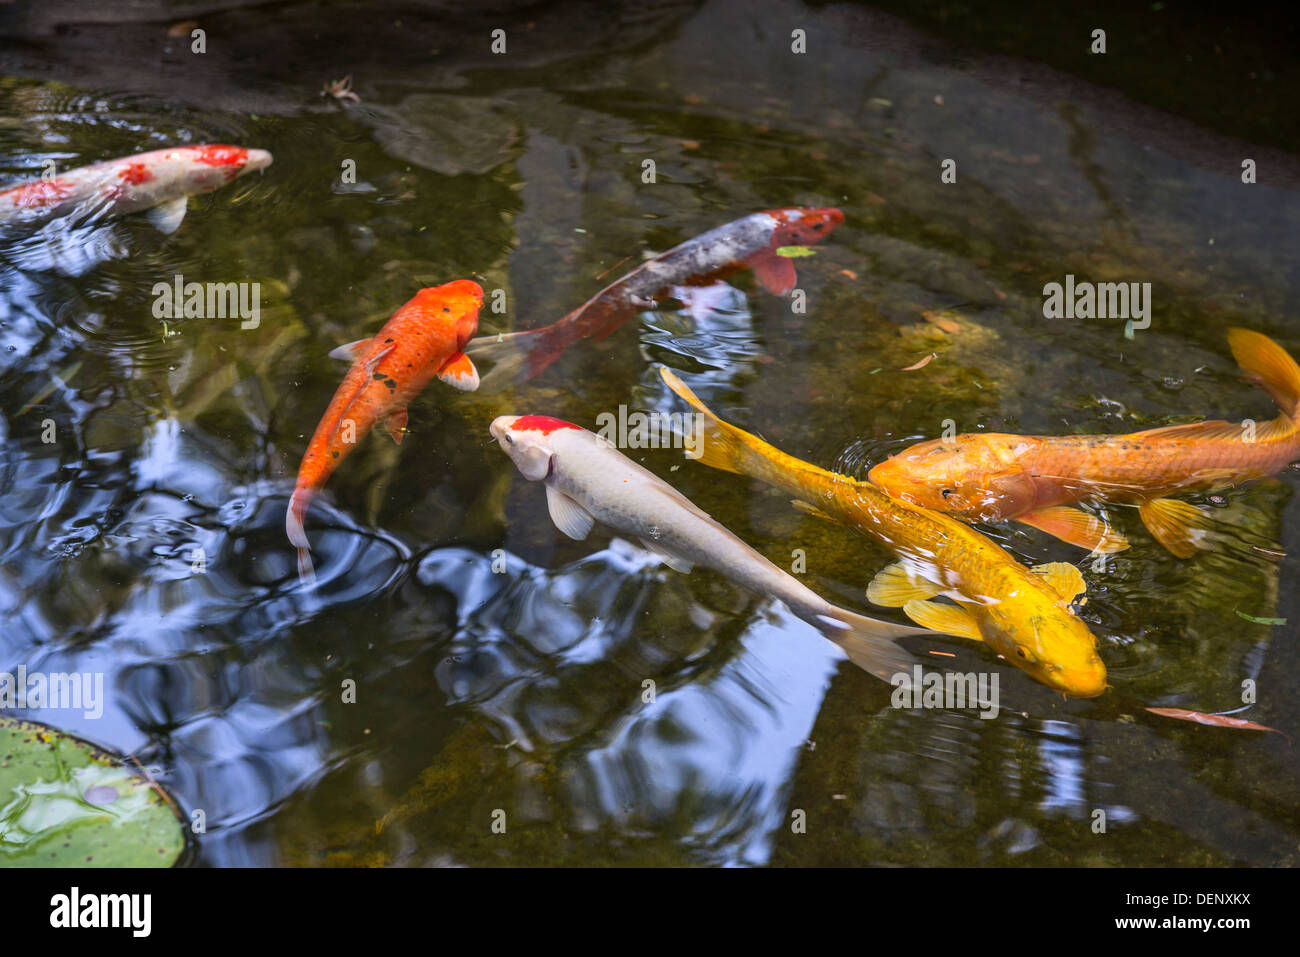 Beautiful koi fish and lily pads in a garden. Stock Photo